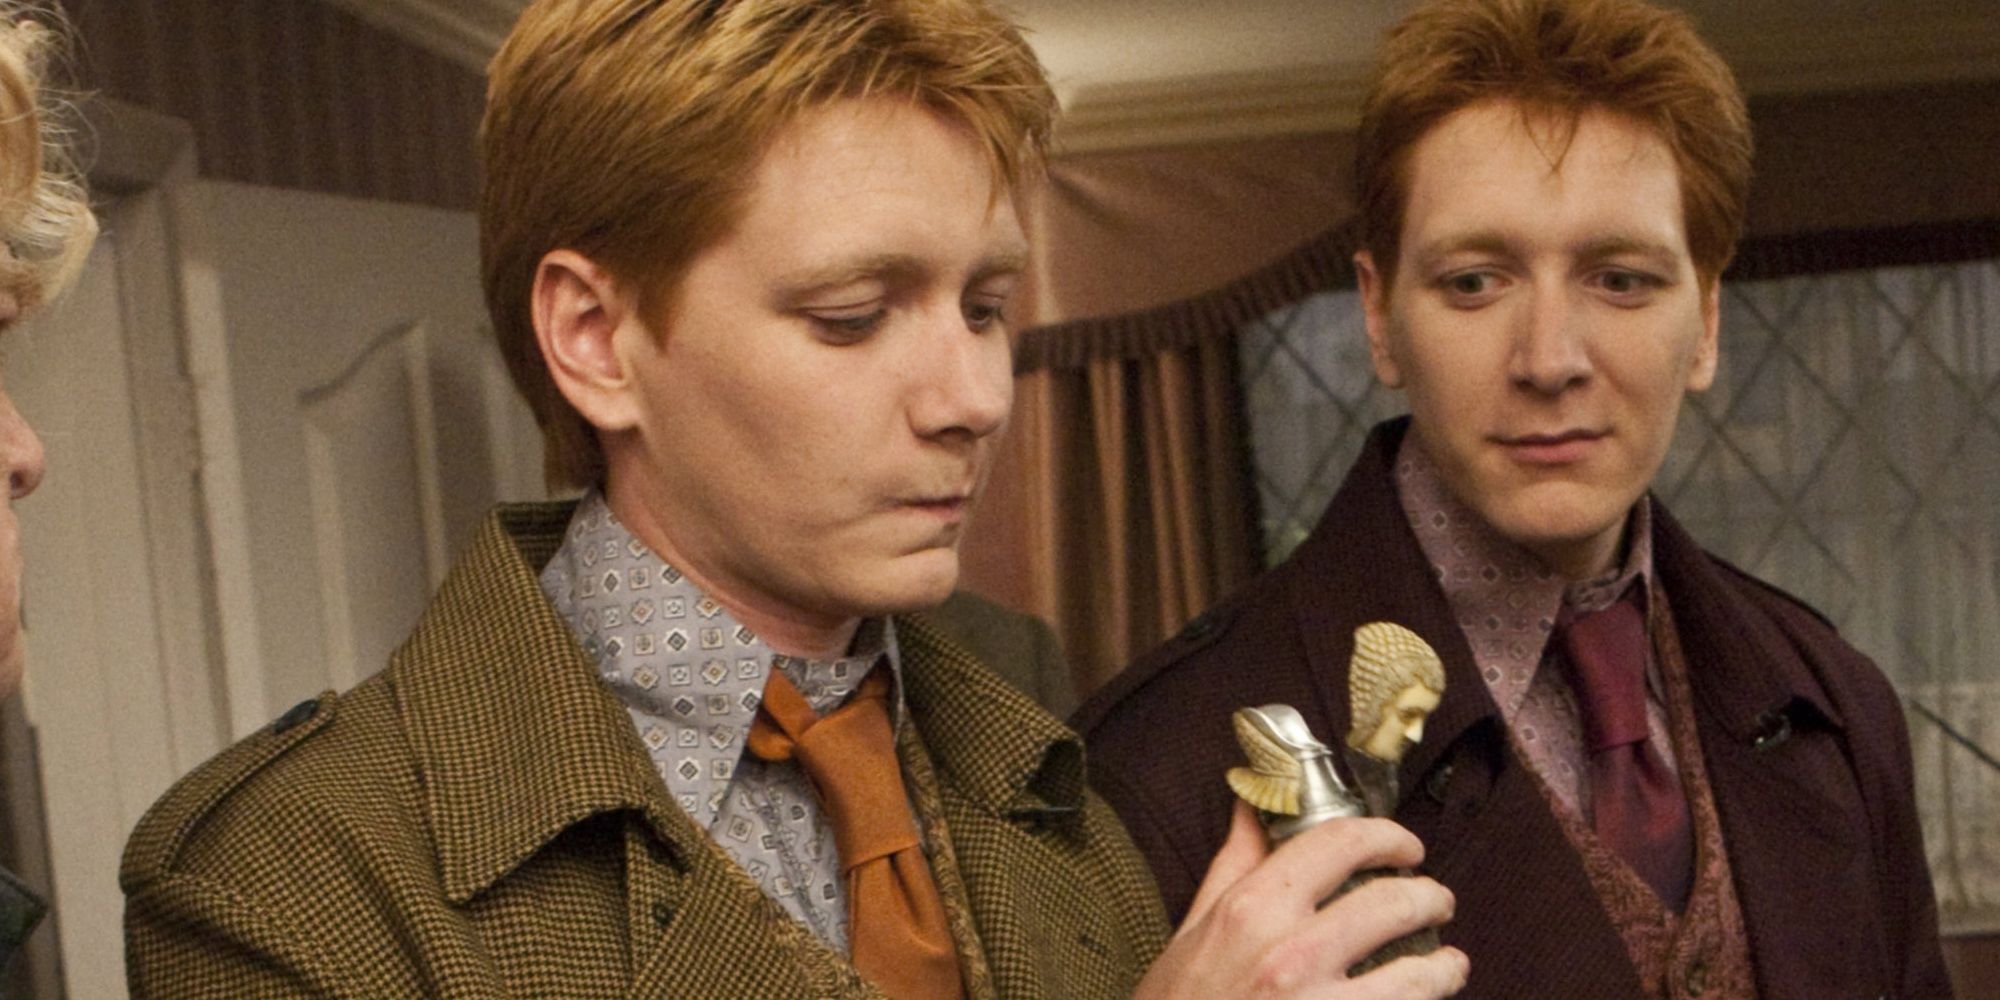 fred and george in harrys house before the battle of the seven potters